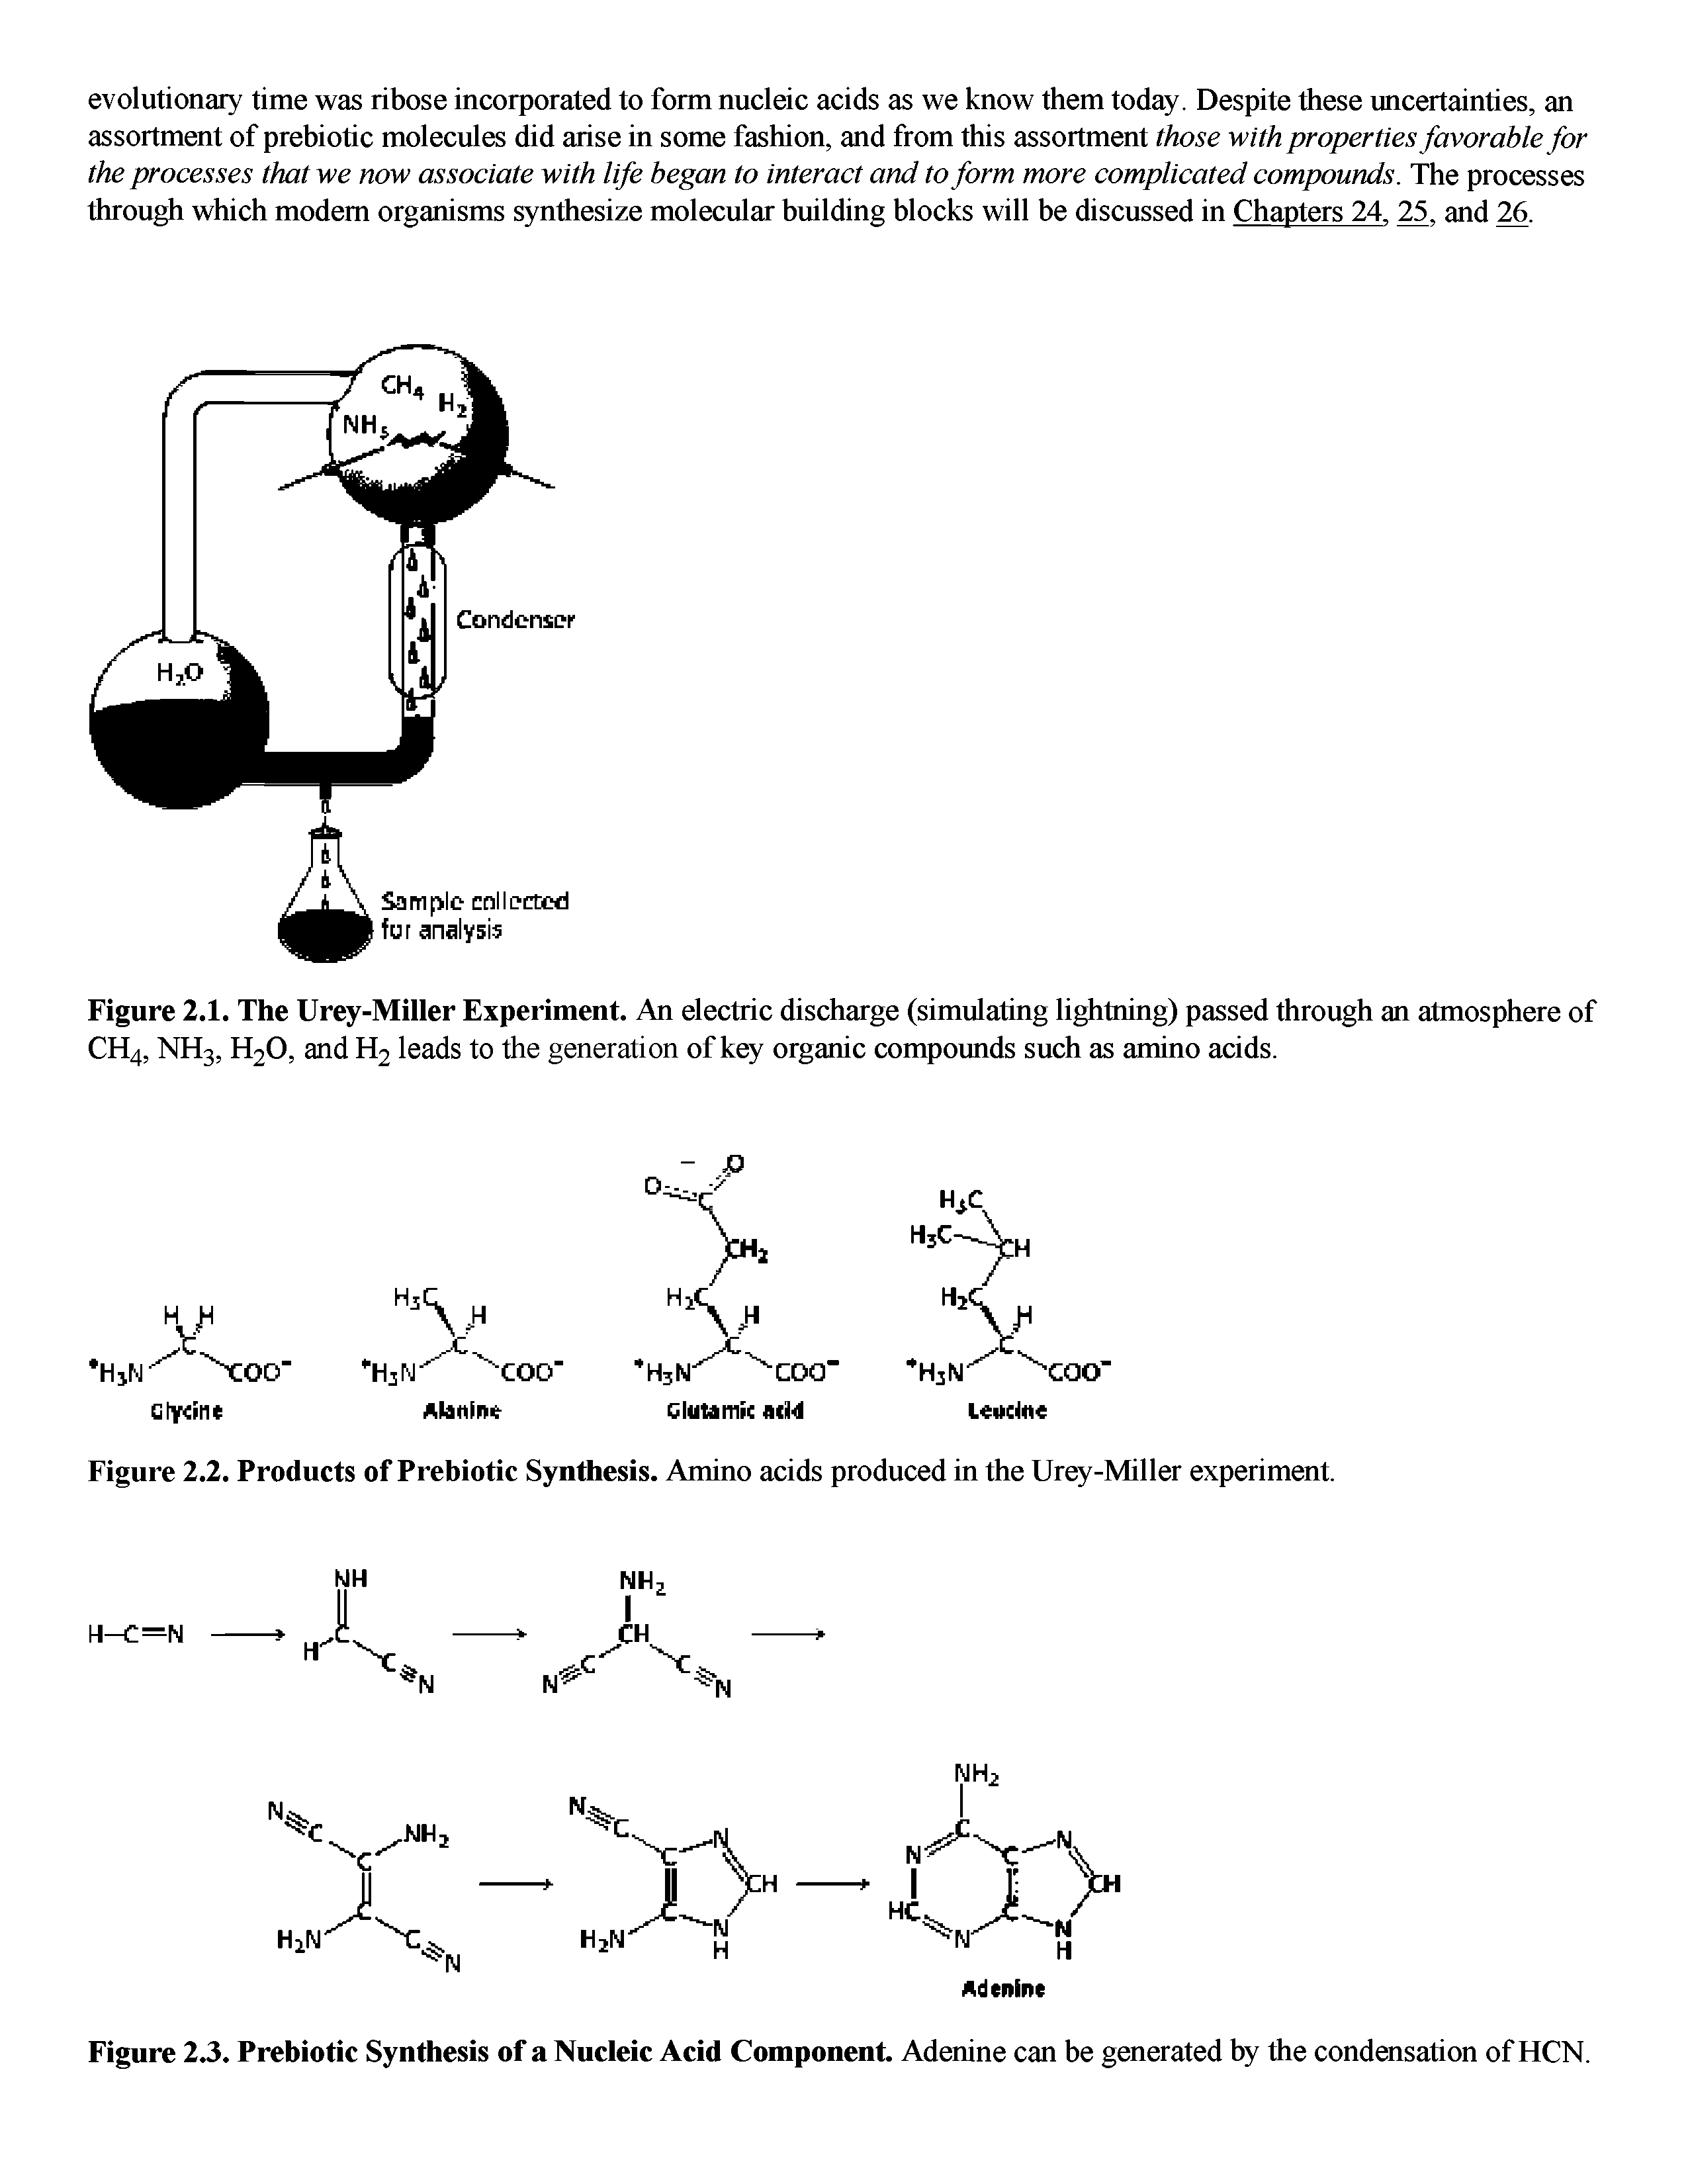 Figure 2.1. The Urey-Miller Experiment. An electric discharge (simulating lightning) passed through an atmosphere of CH4, NH3, H2O, and H2 leads to the generation of key organic compounds such as amino acids.